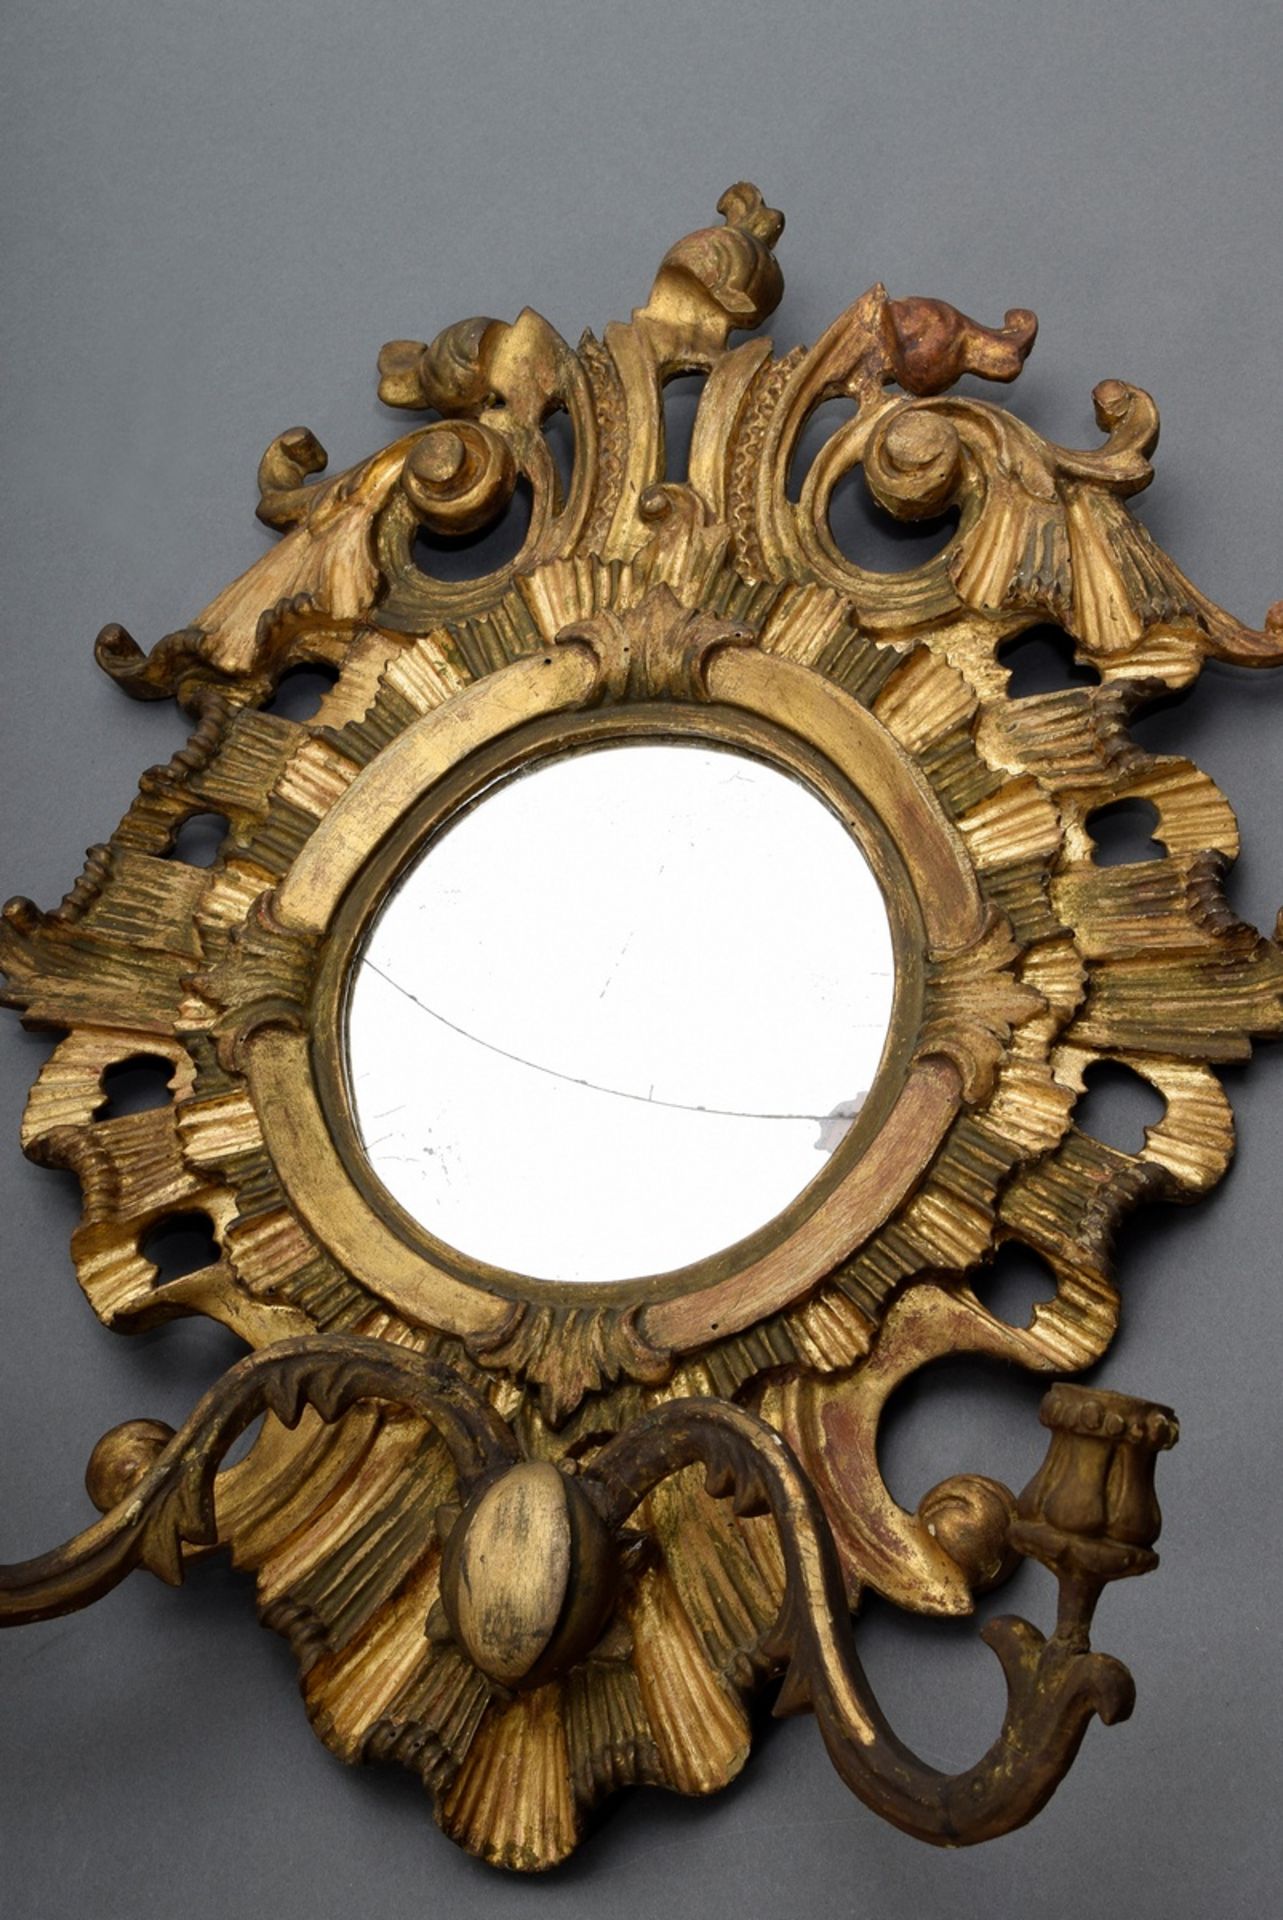 Pair of baroque wall lamp with mirrors and 2 candle arms, gilded wood, mid 18th century, 55x39,5cm, - Image 2 of 8